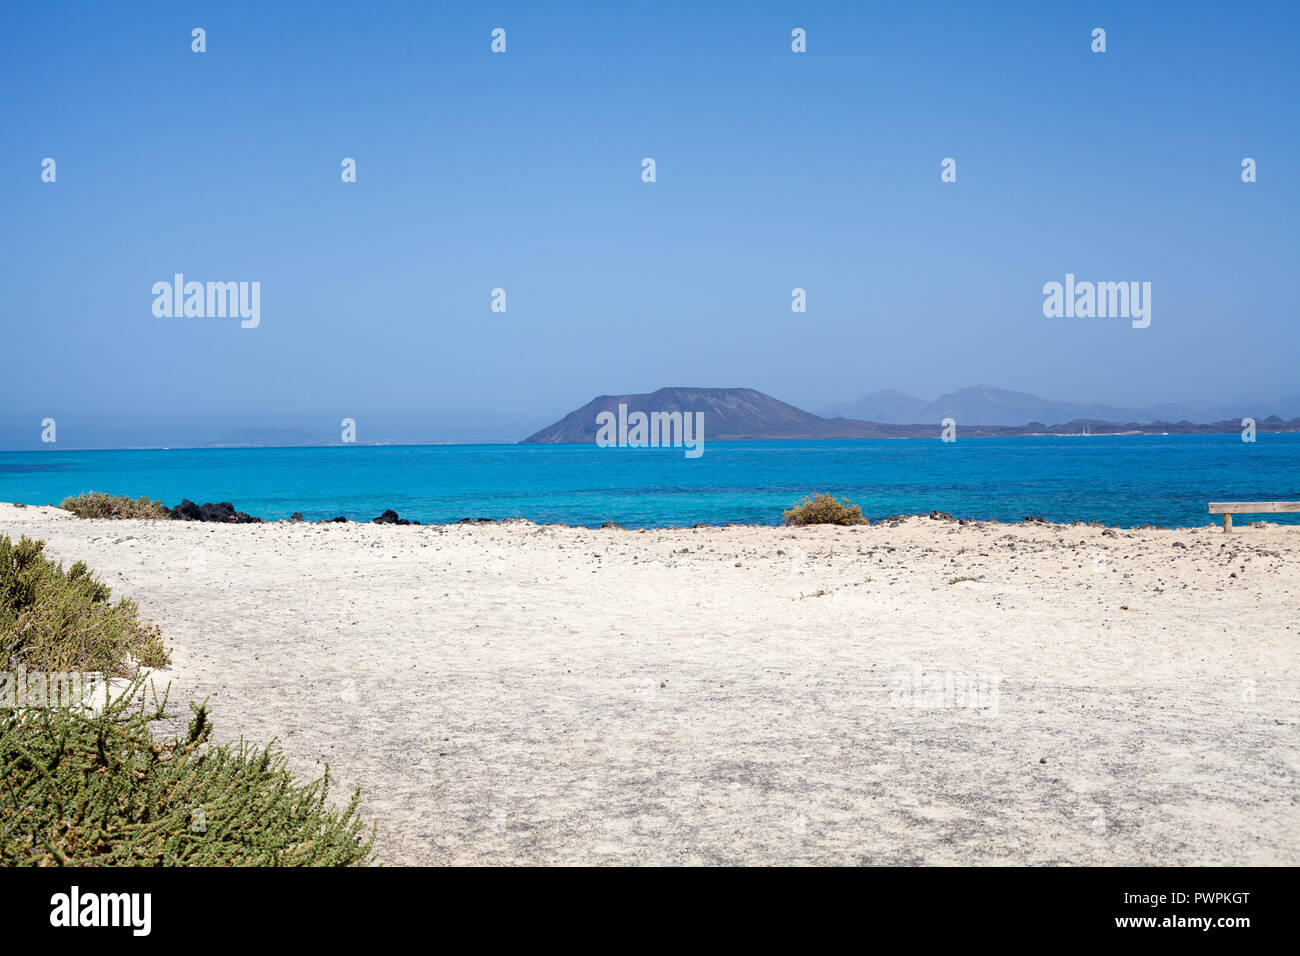 The tiny Island of Los Lobos and Lanzarote in the distance seen from Las Grandes Playas, Fuerteventura, Canary Islands, Spain Stock Photo